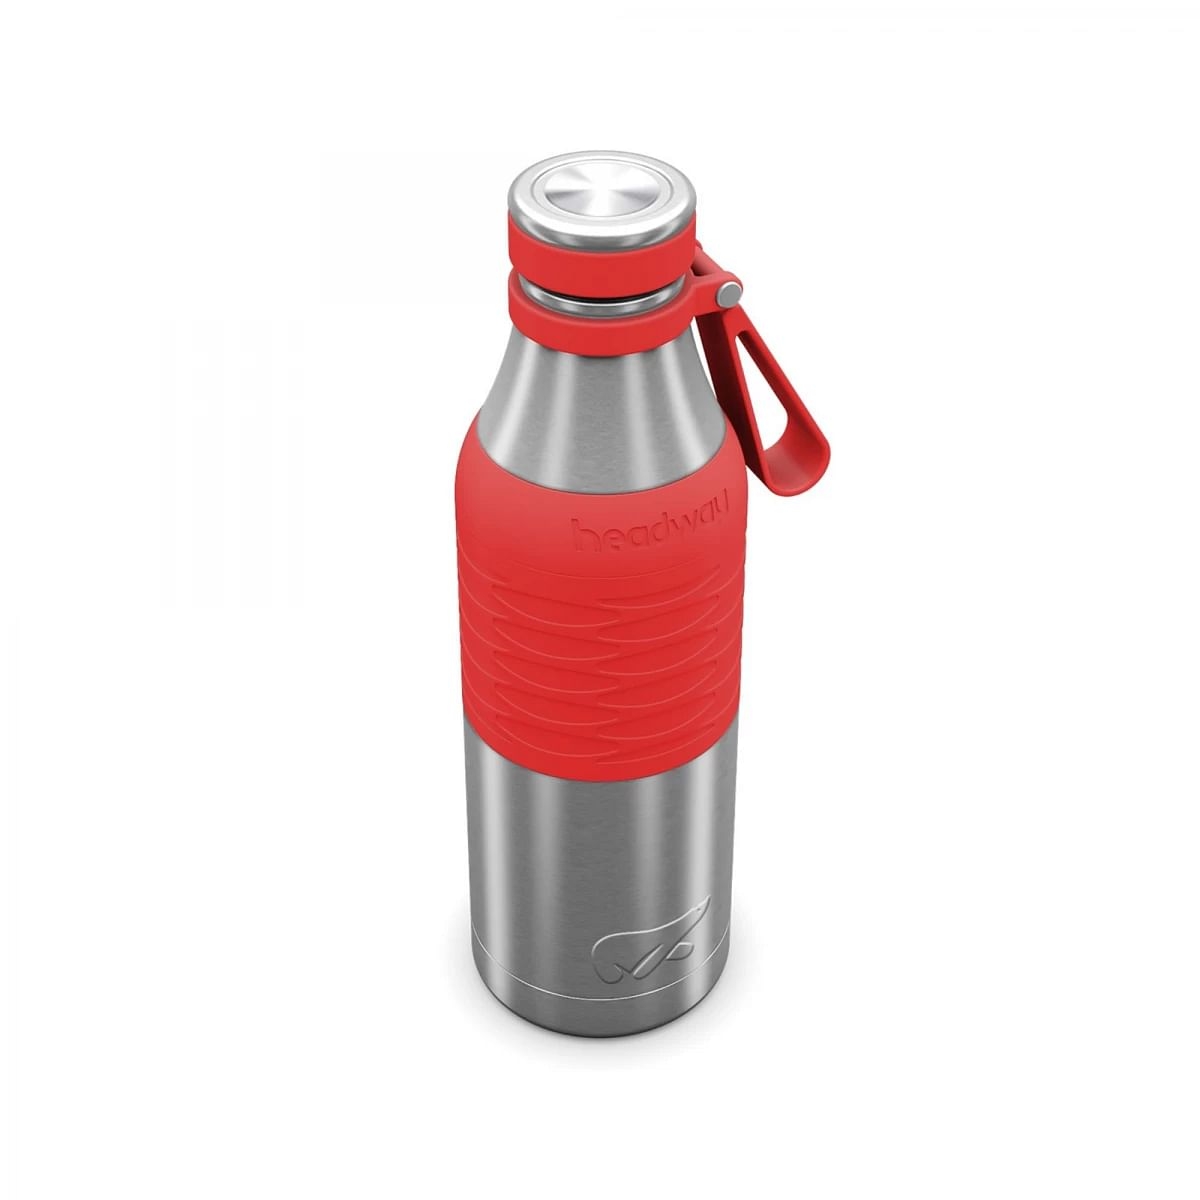 Headway Burell Stainless Steel Insulated Bottle Coral Colour 600 ML Coral 10Y+